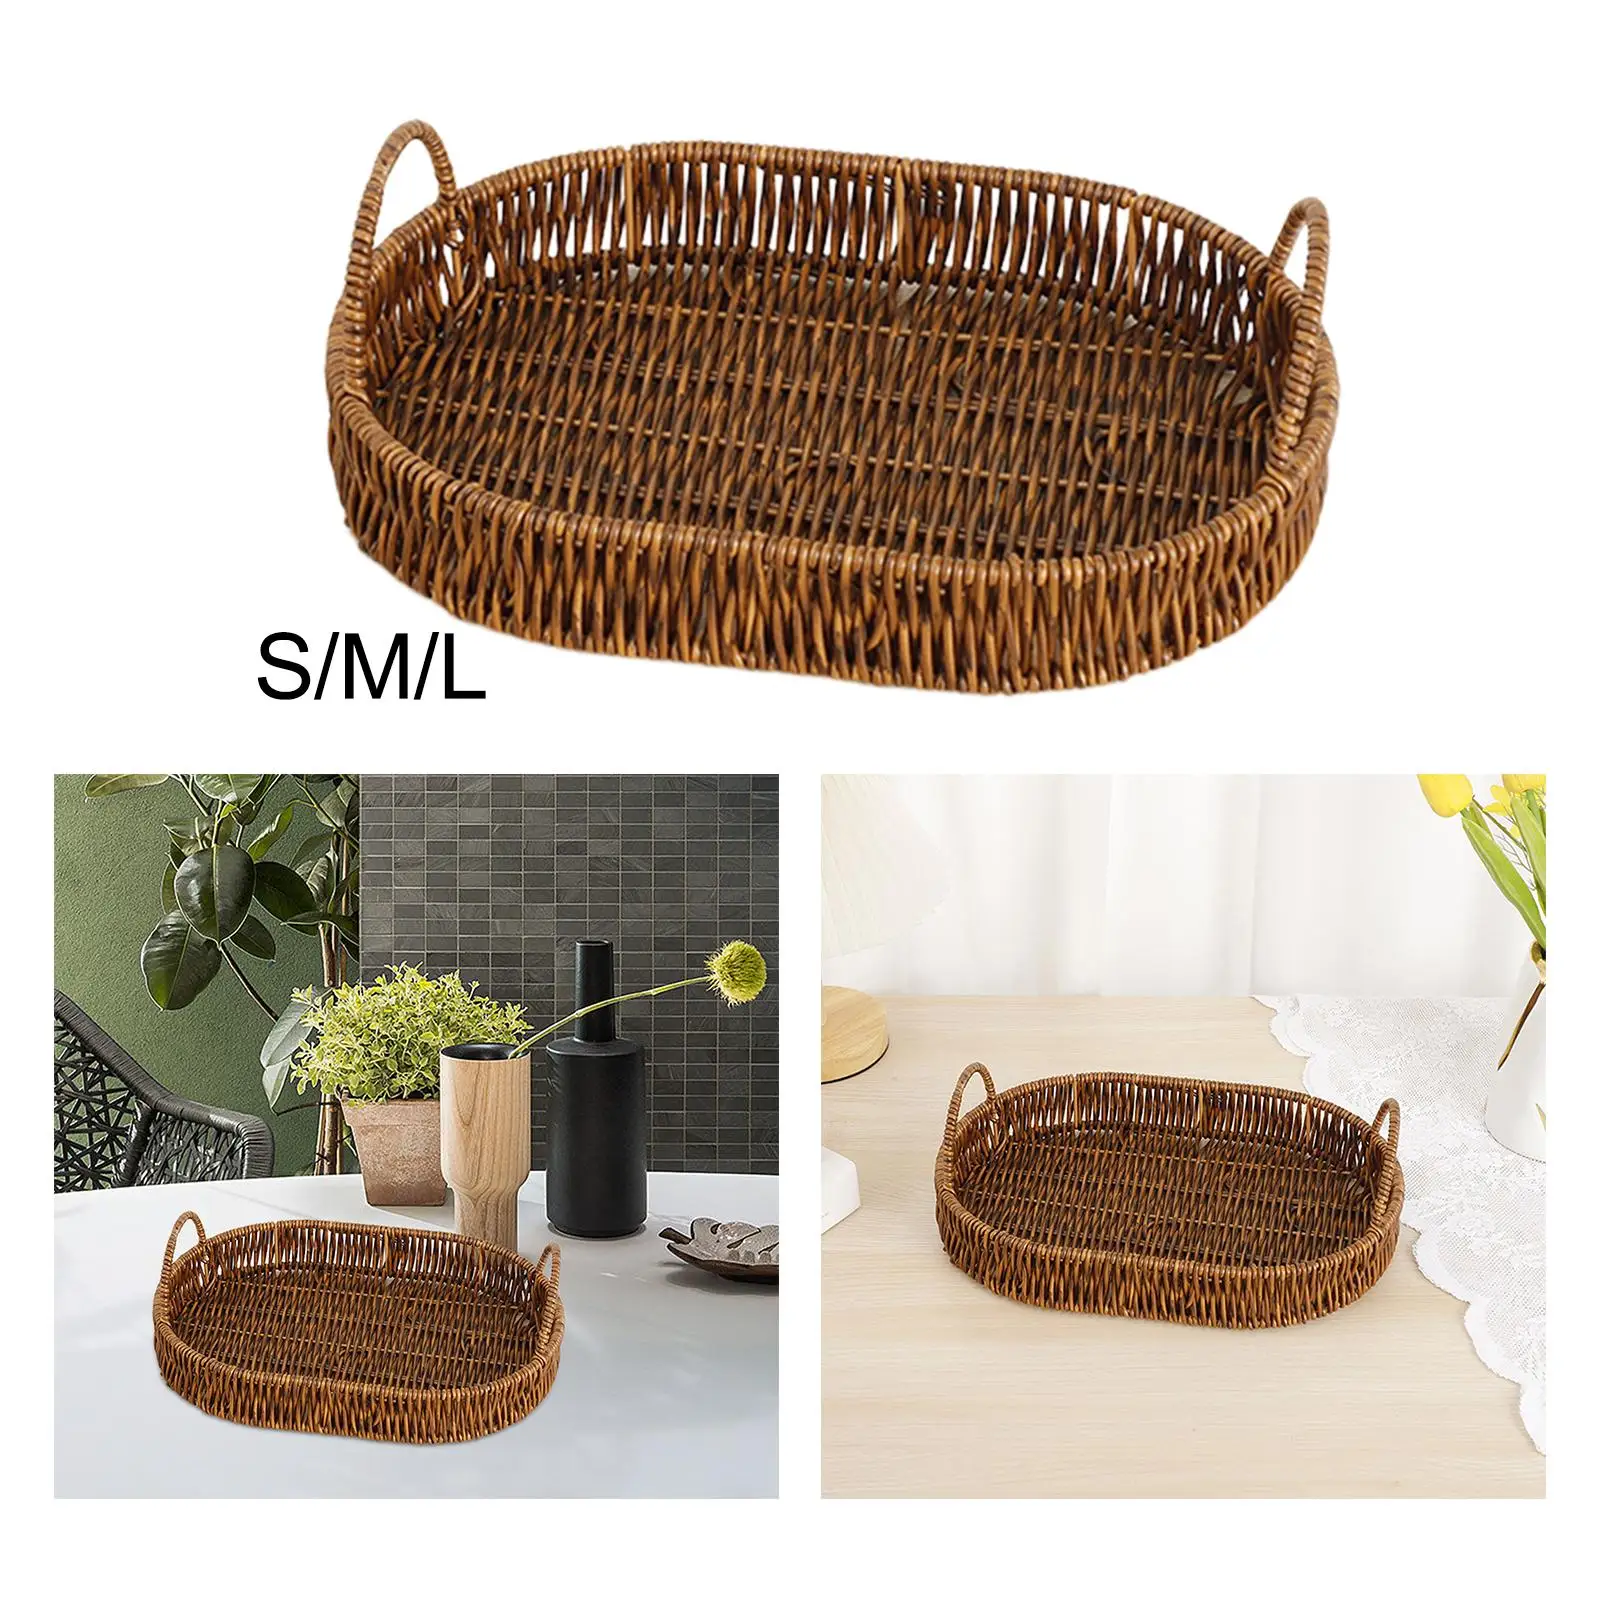 Handmade Woven Fruit Basket Organizer Decorative Wicker Woven Basket for Dining Coffee Table Restaurant Vegetables Hotel Fruits